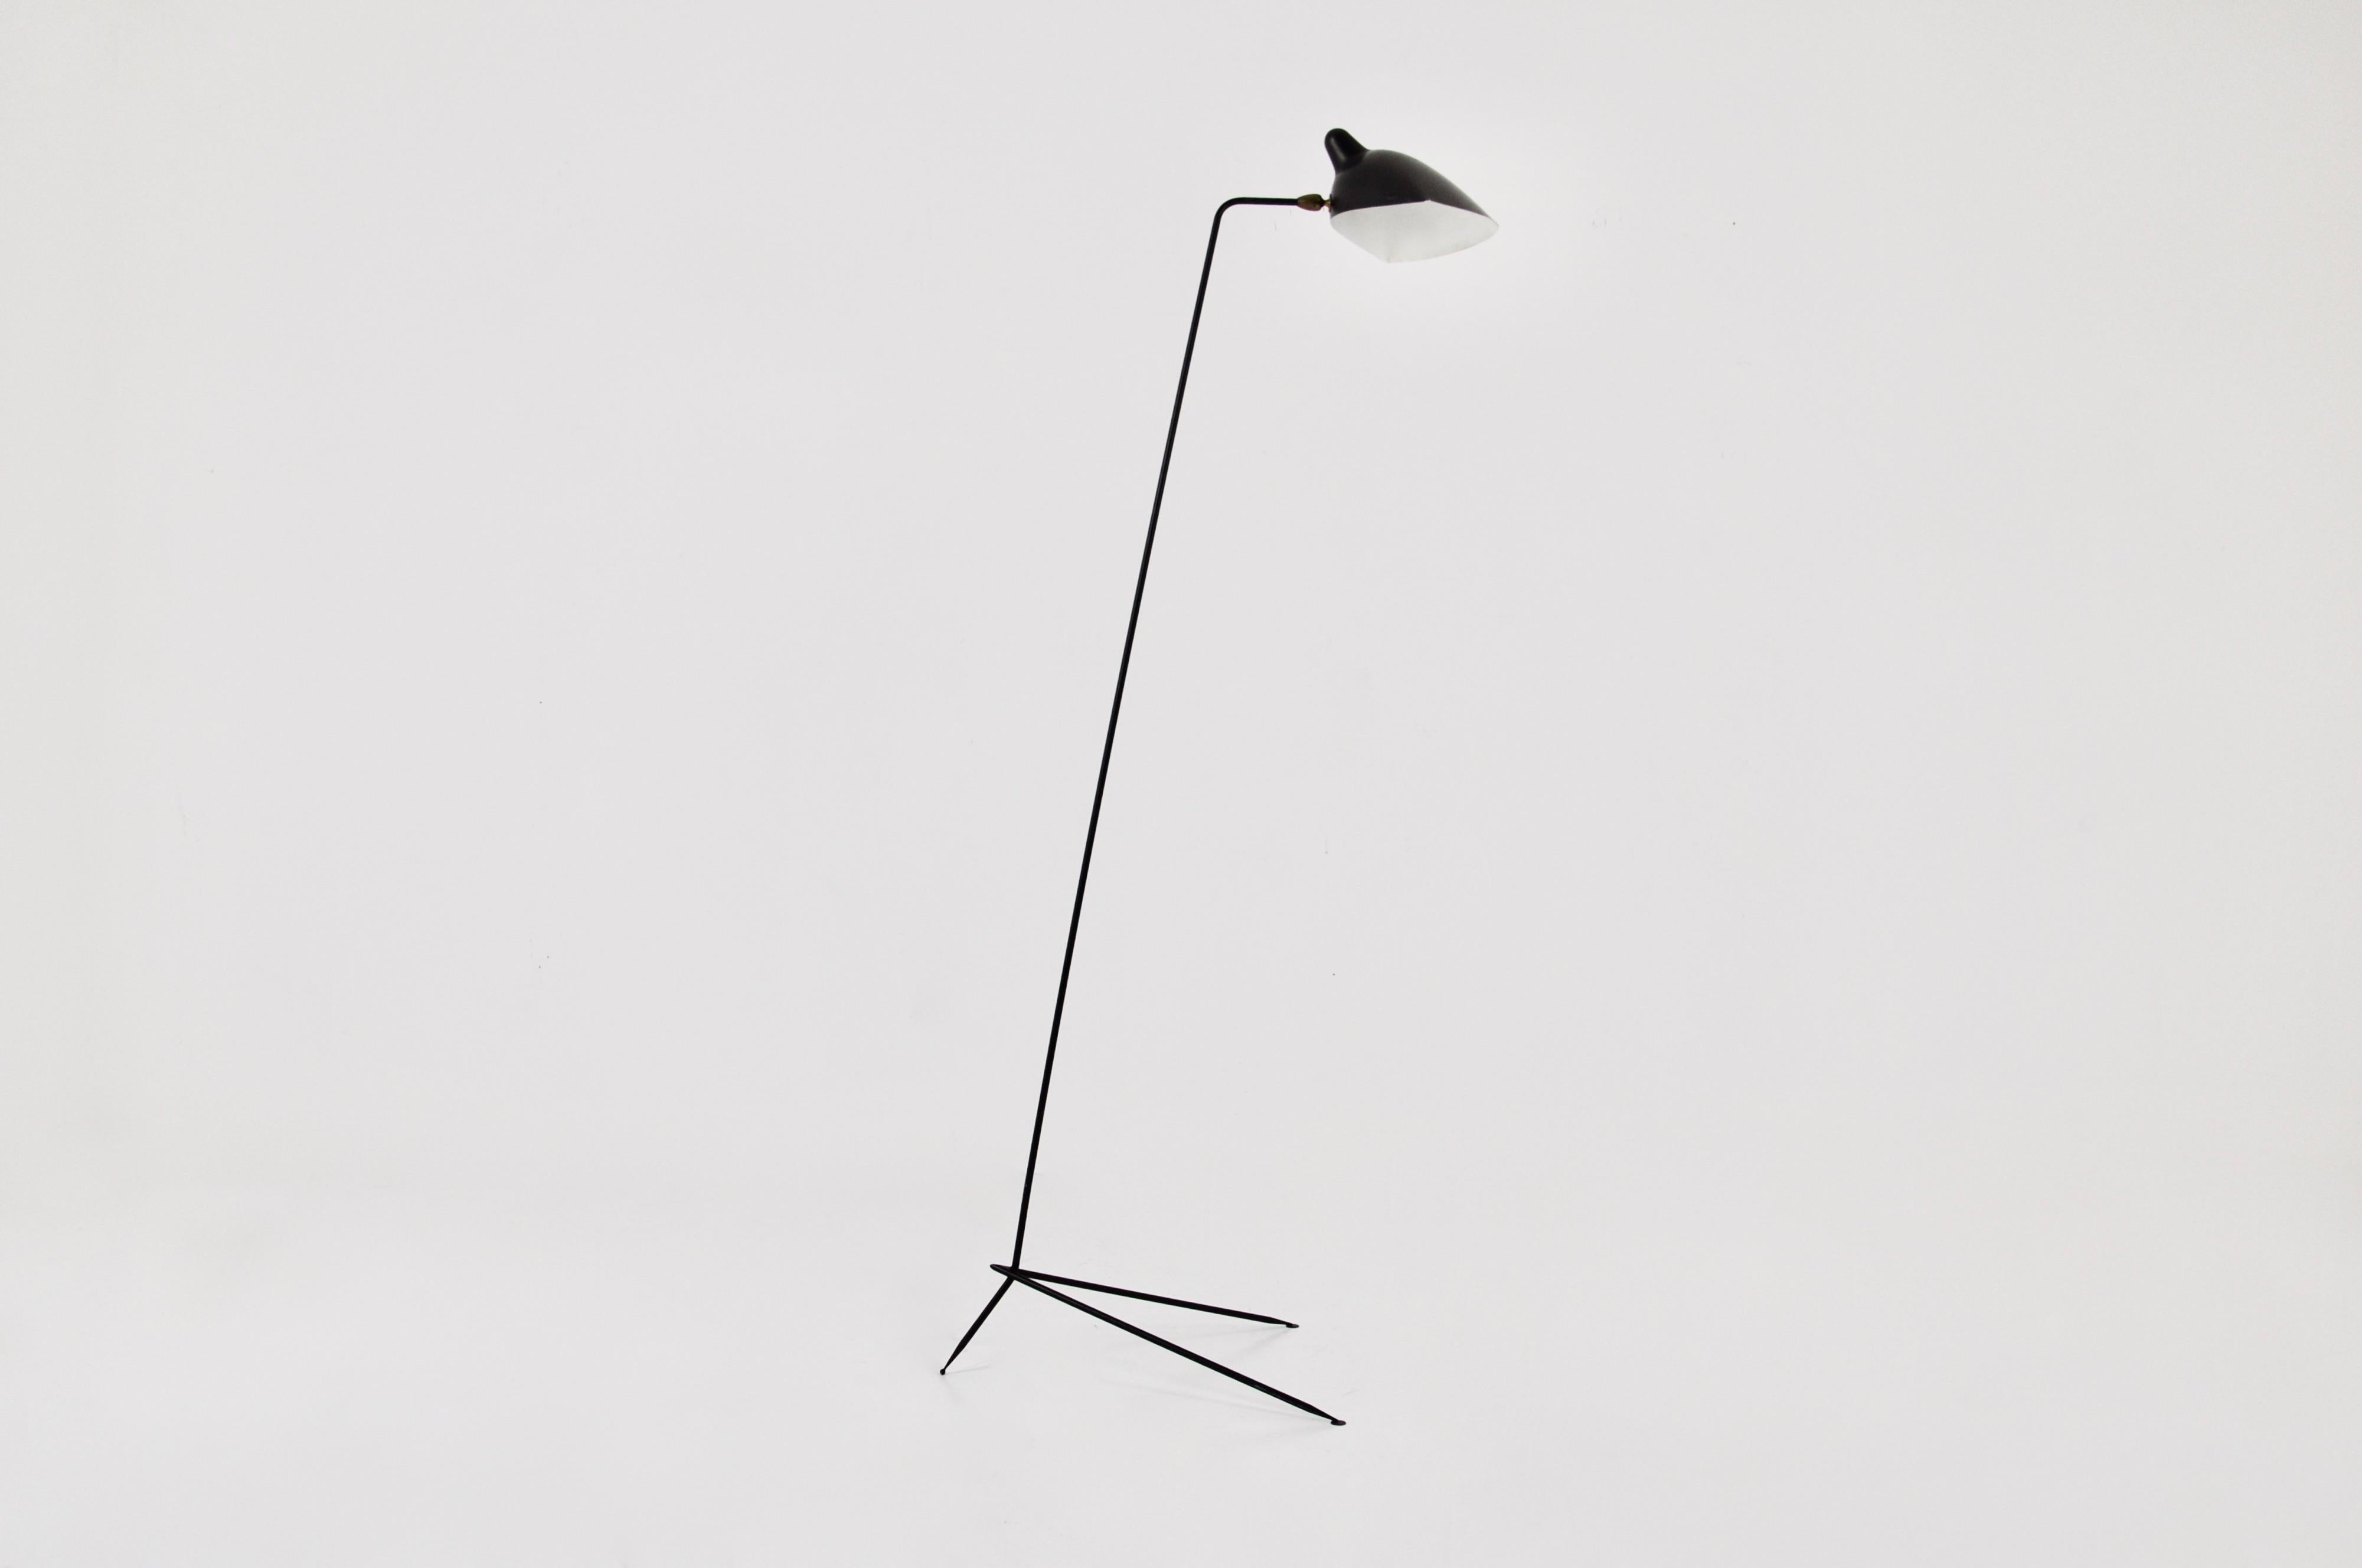 Floor lamp in black metal by Serge Mouille. This is the first edition made in 1953. Wear due to time and age.  